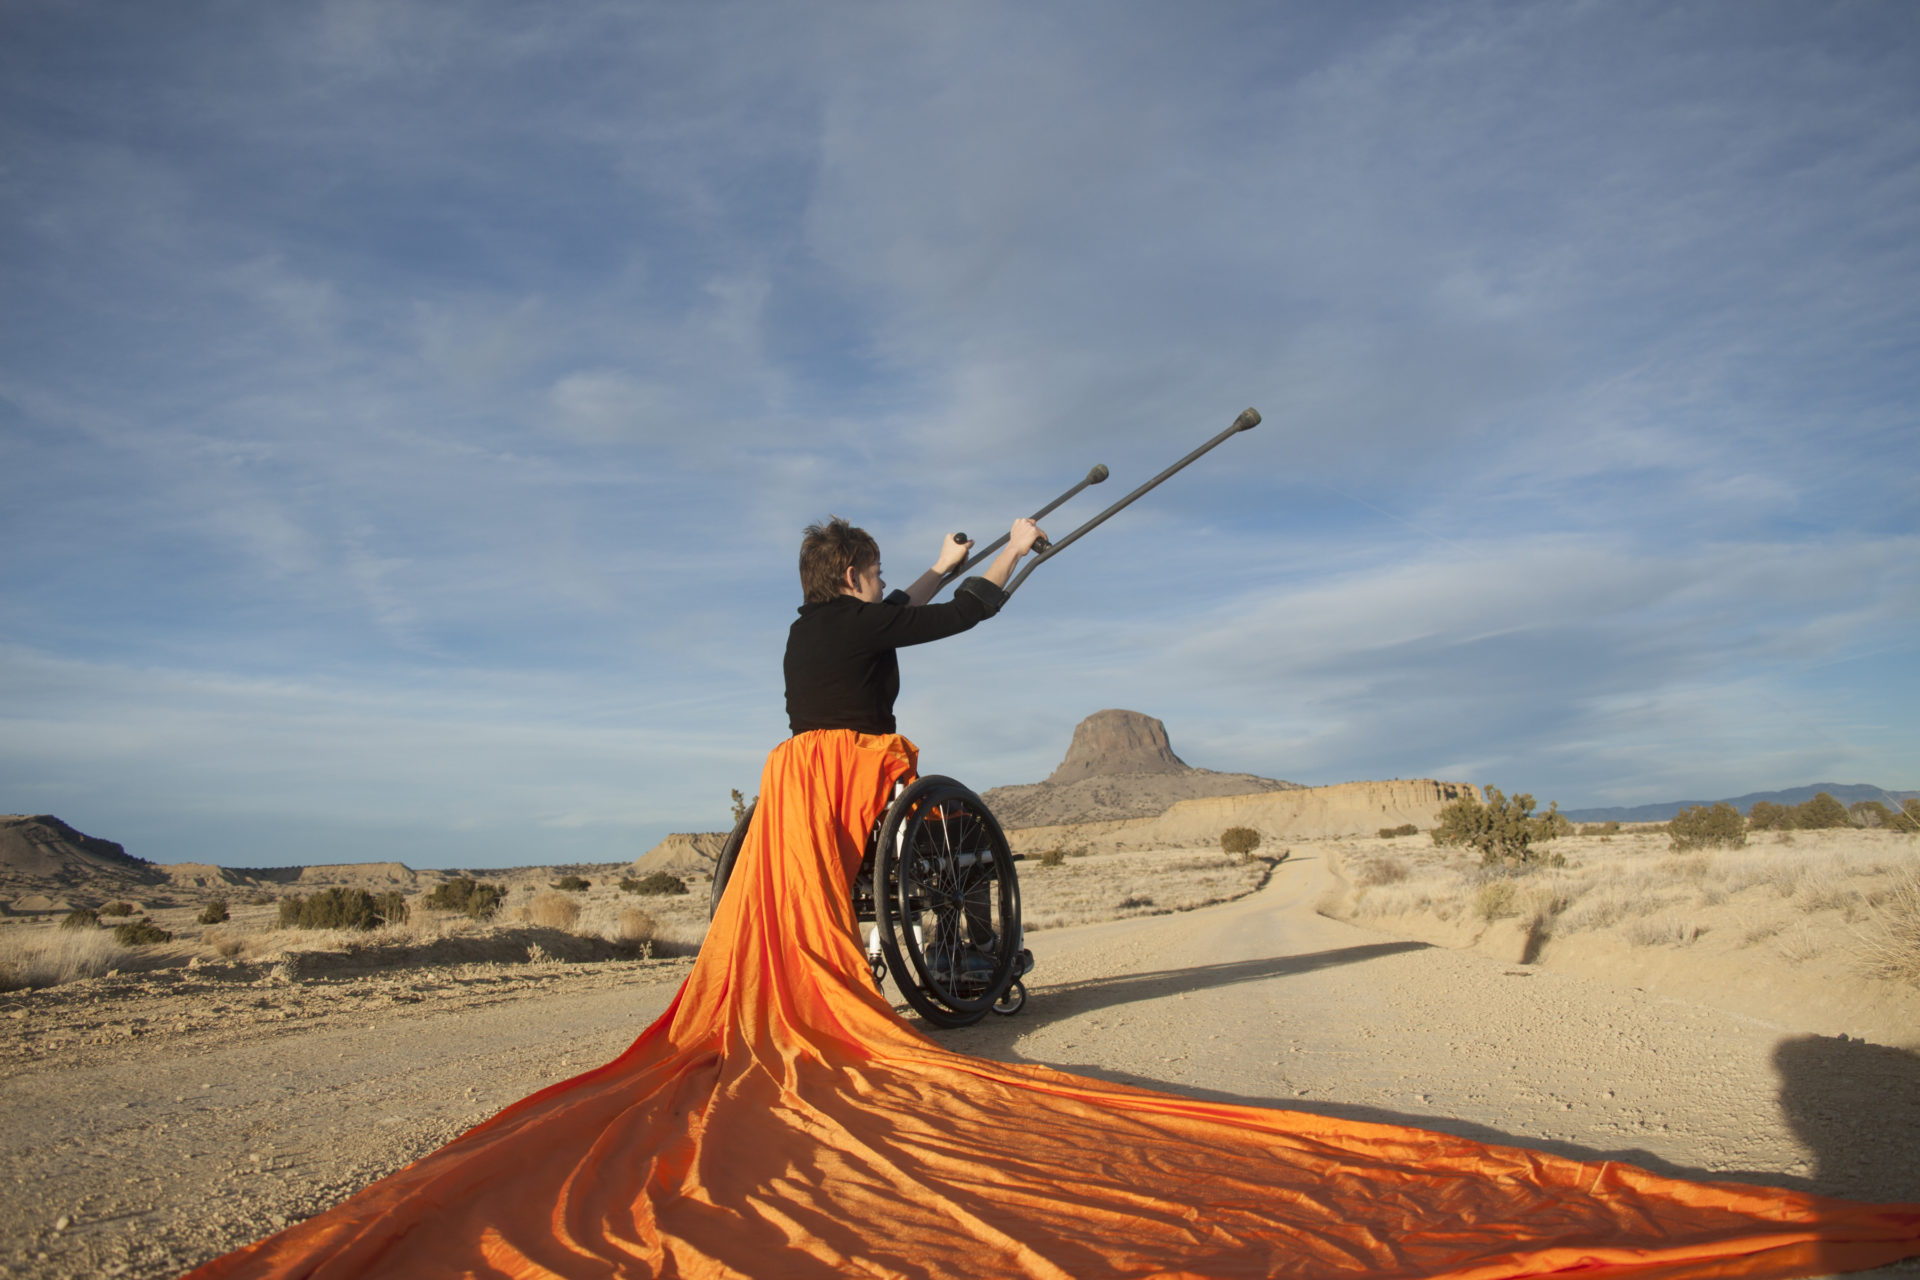 Tanya sitting in her chair on a dirt road and the chair has large orange fabric draped form the seat of it. Tanya is holding her crutches diagonally up towards the blue and white sky. The photo is taken in New Mexico and has desert landscape with small hill on it. Photo by Pat Perret